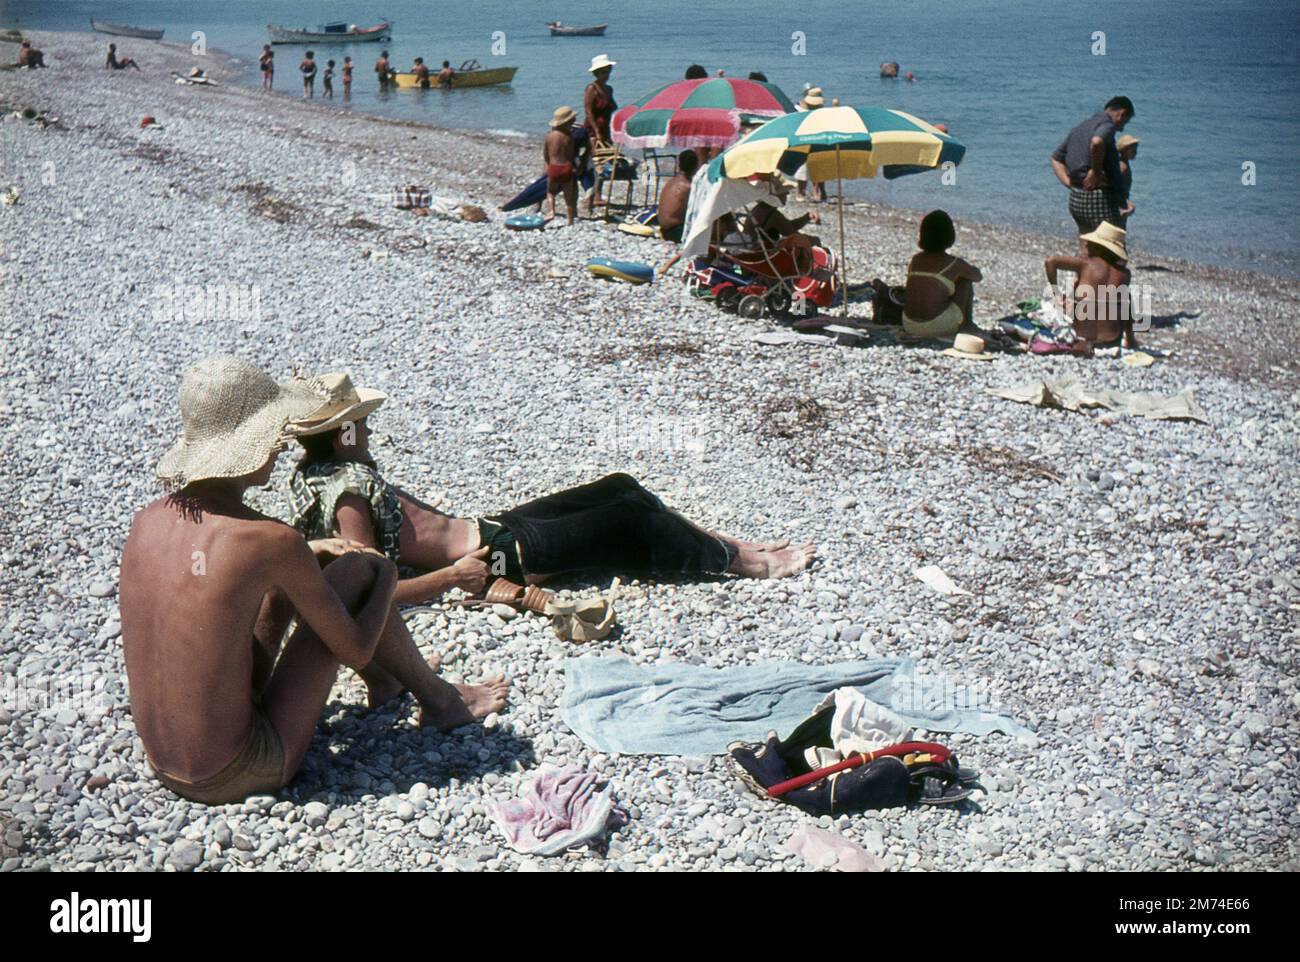 Xylokastro, Greece. August 1963. Two young men, other tourists and local families are relaxing on the beach at the seaside town of Xylokastro in Corinthia in the Peloponnese, Greece. The visitors are sunbathing, some sheltering under parasols, whilst others are swimming in the Gulf of Corinth. Various boats are moored just off the beach. Stock Photo